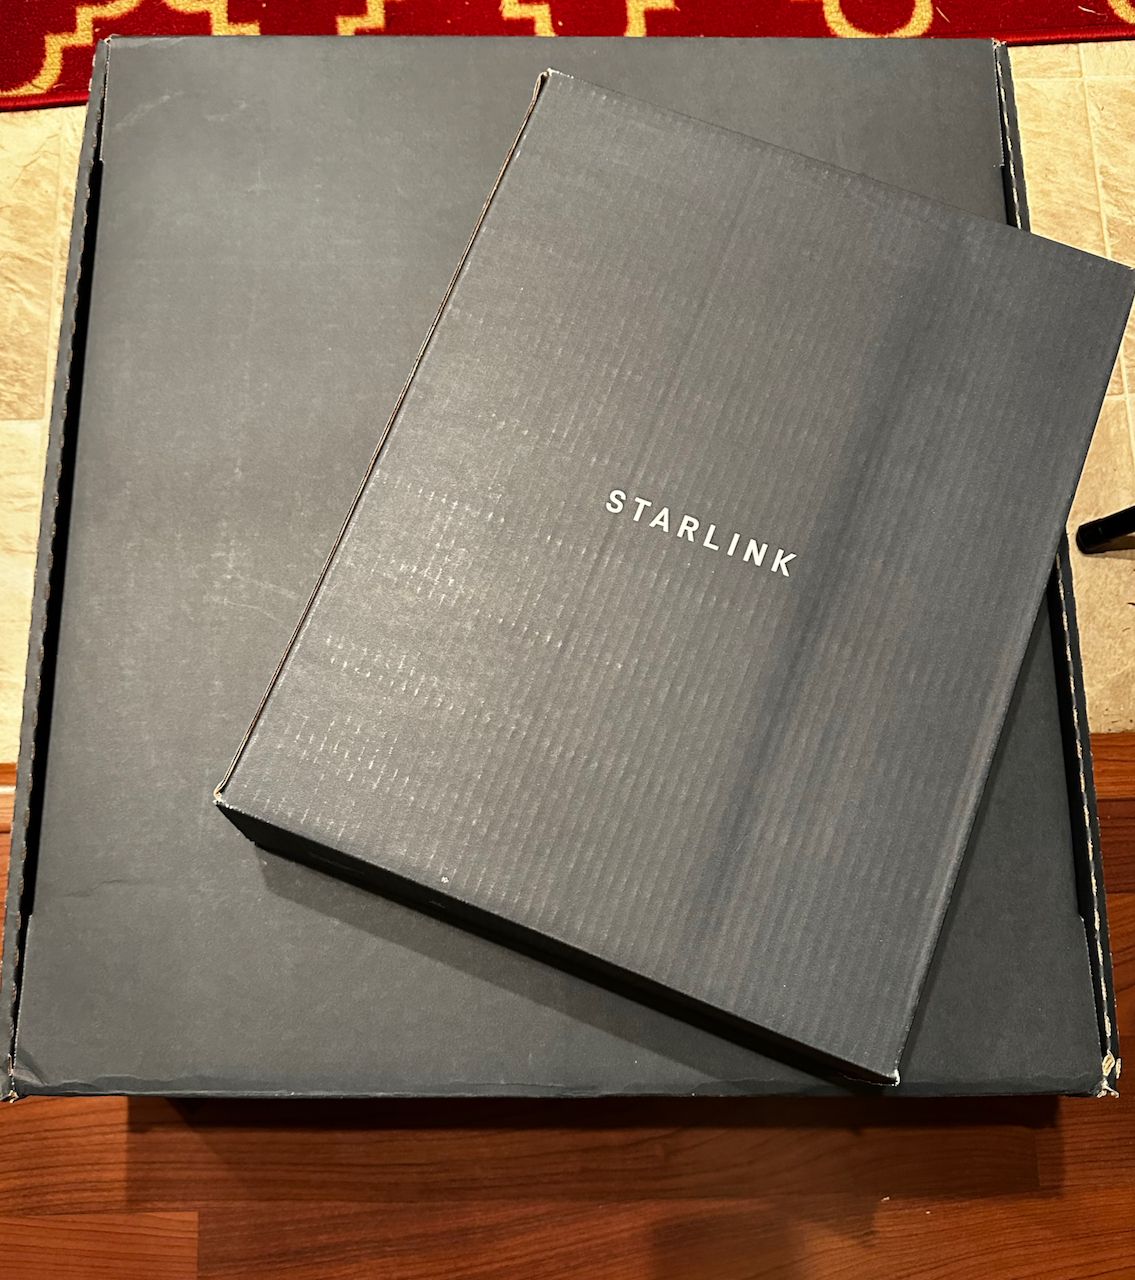 Starlink flat high performance in-motion dish initial impressions